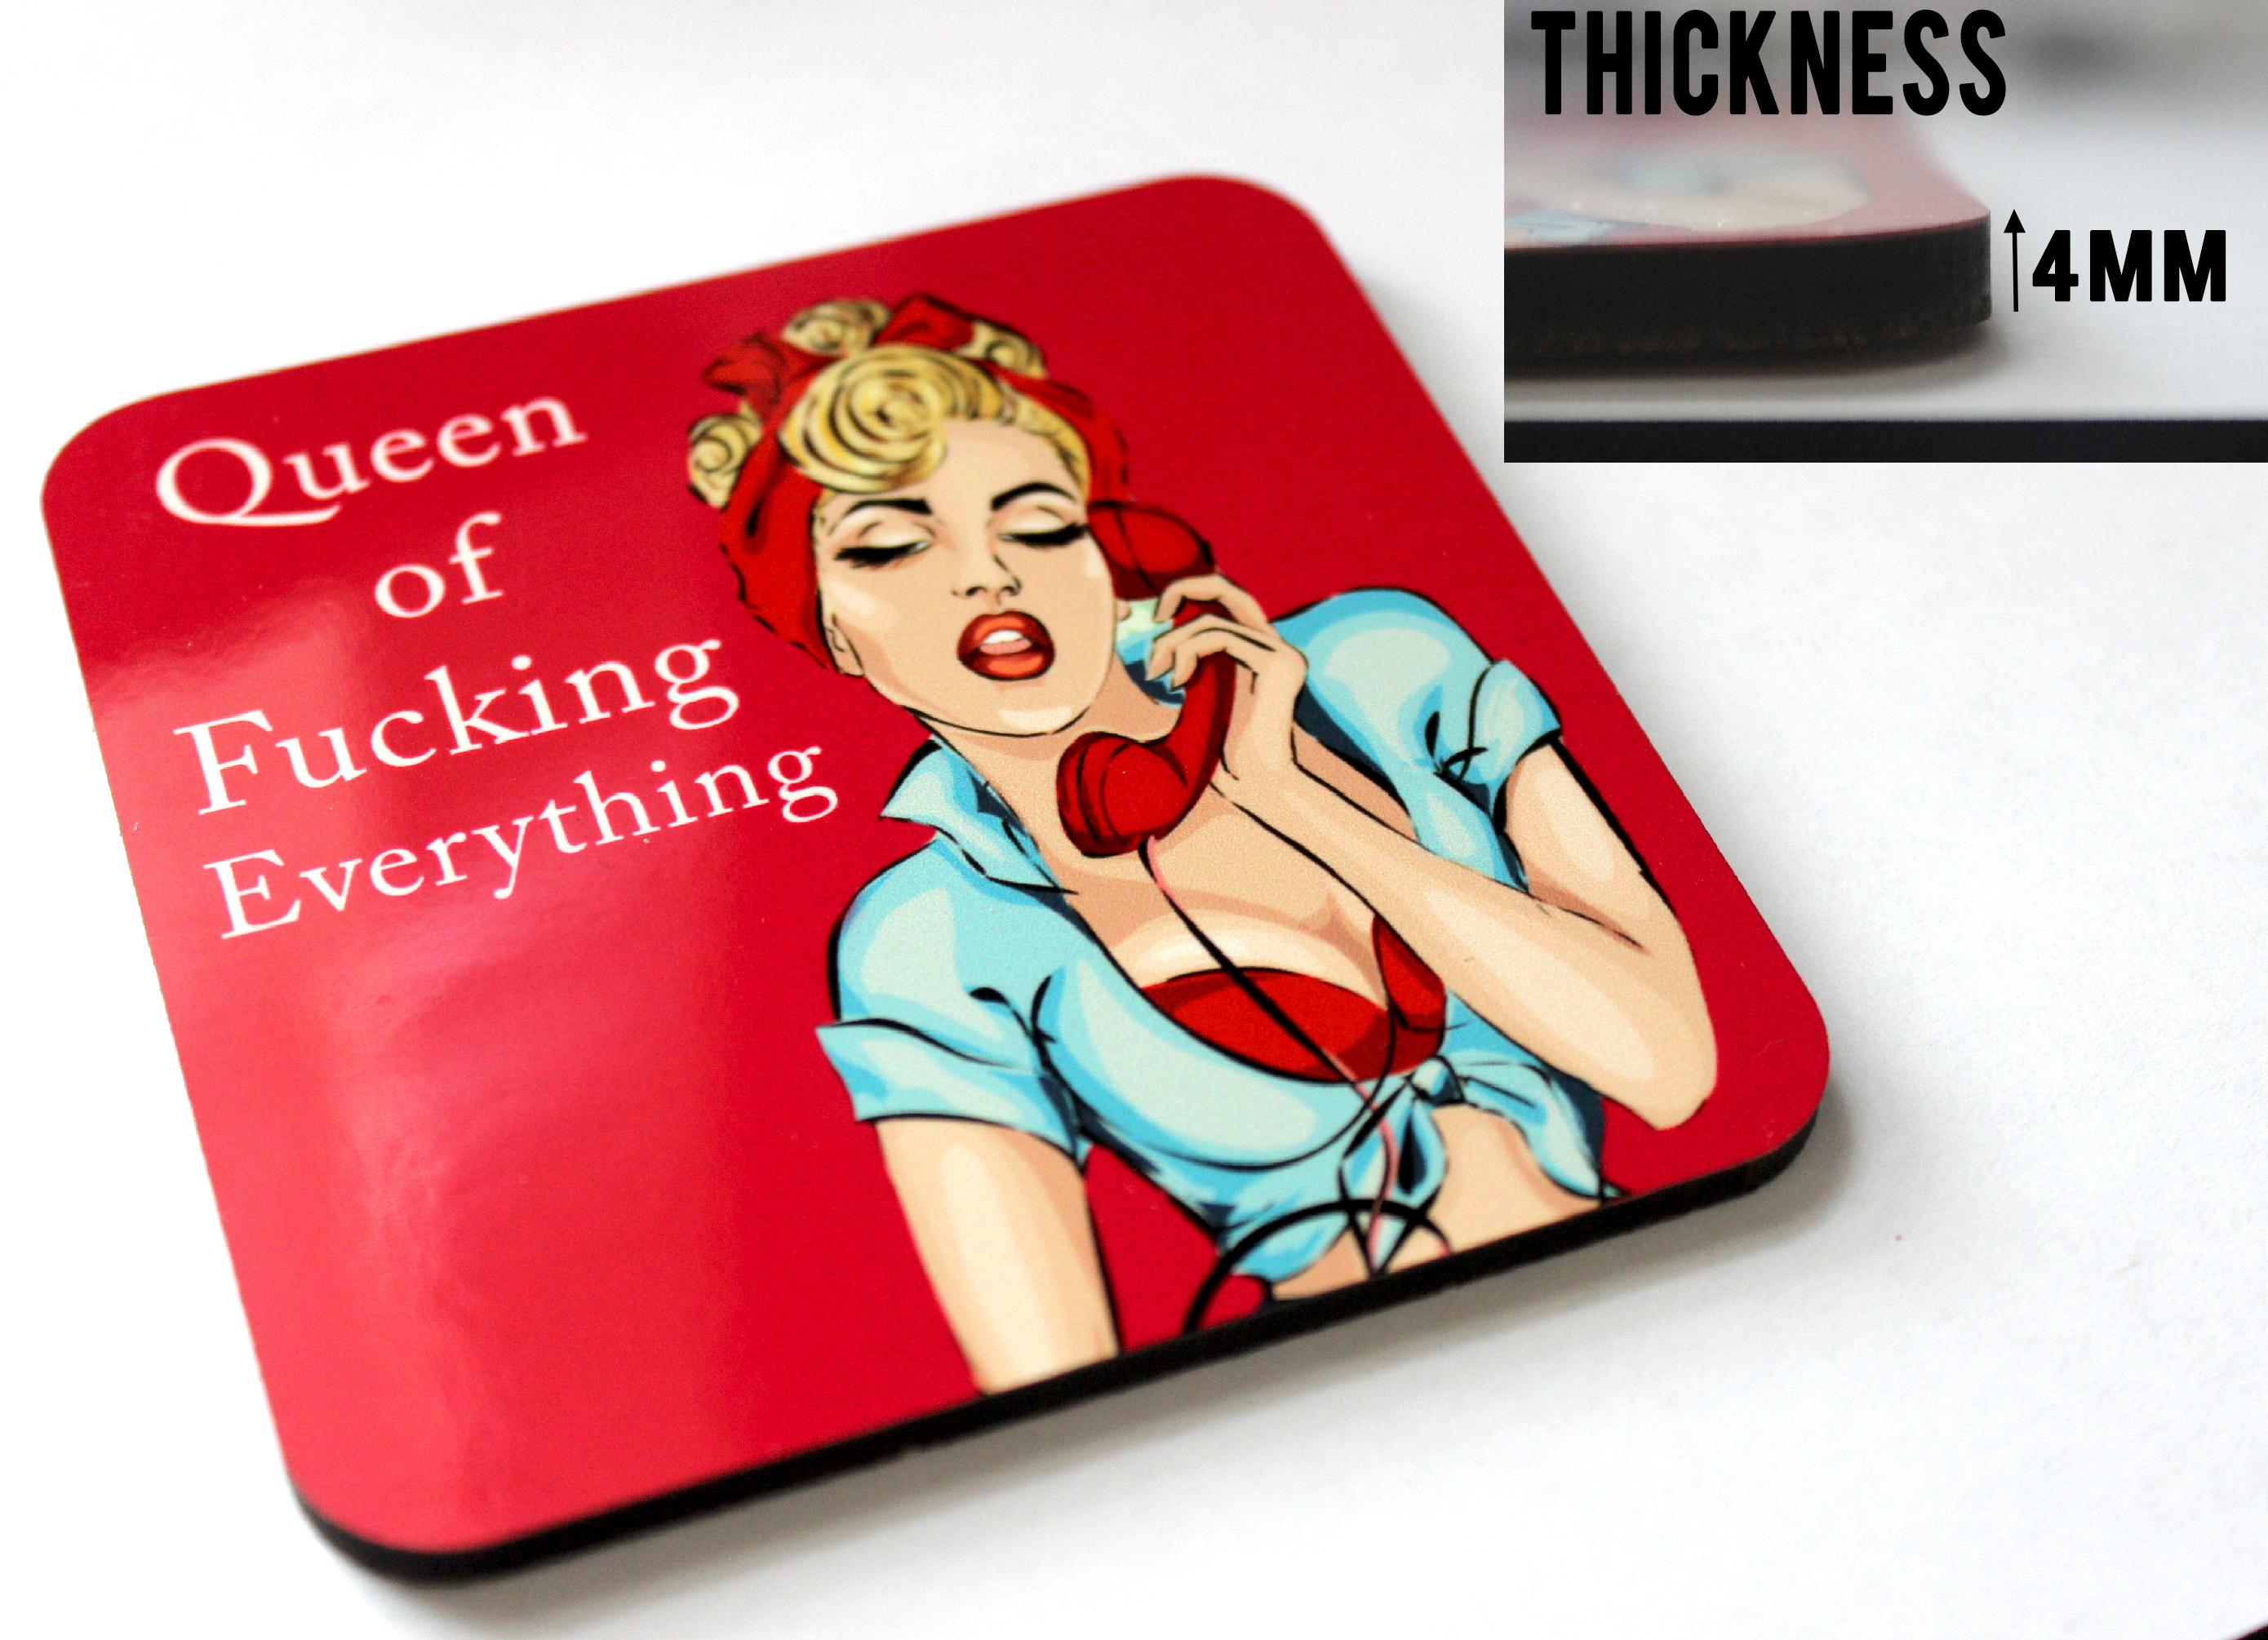 Queen of Fucking everything High Quality Gloss Coaster